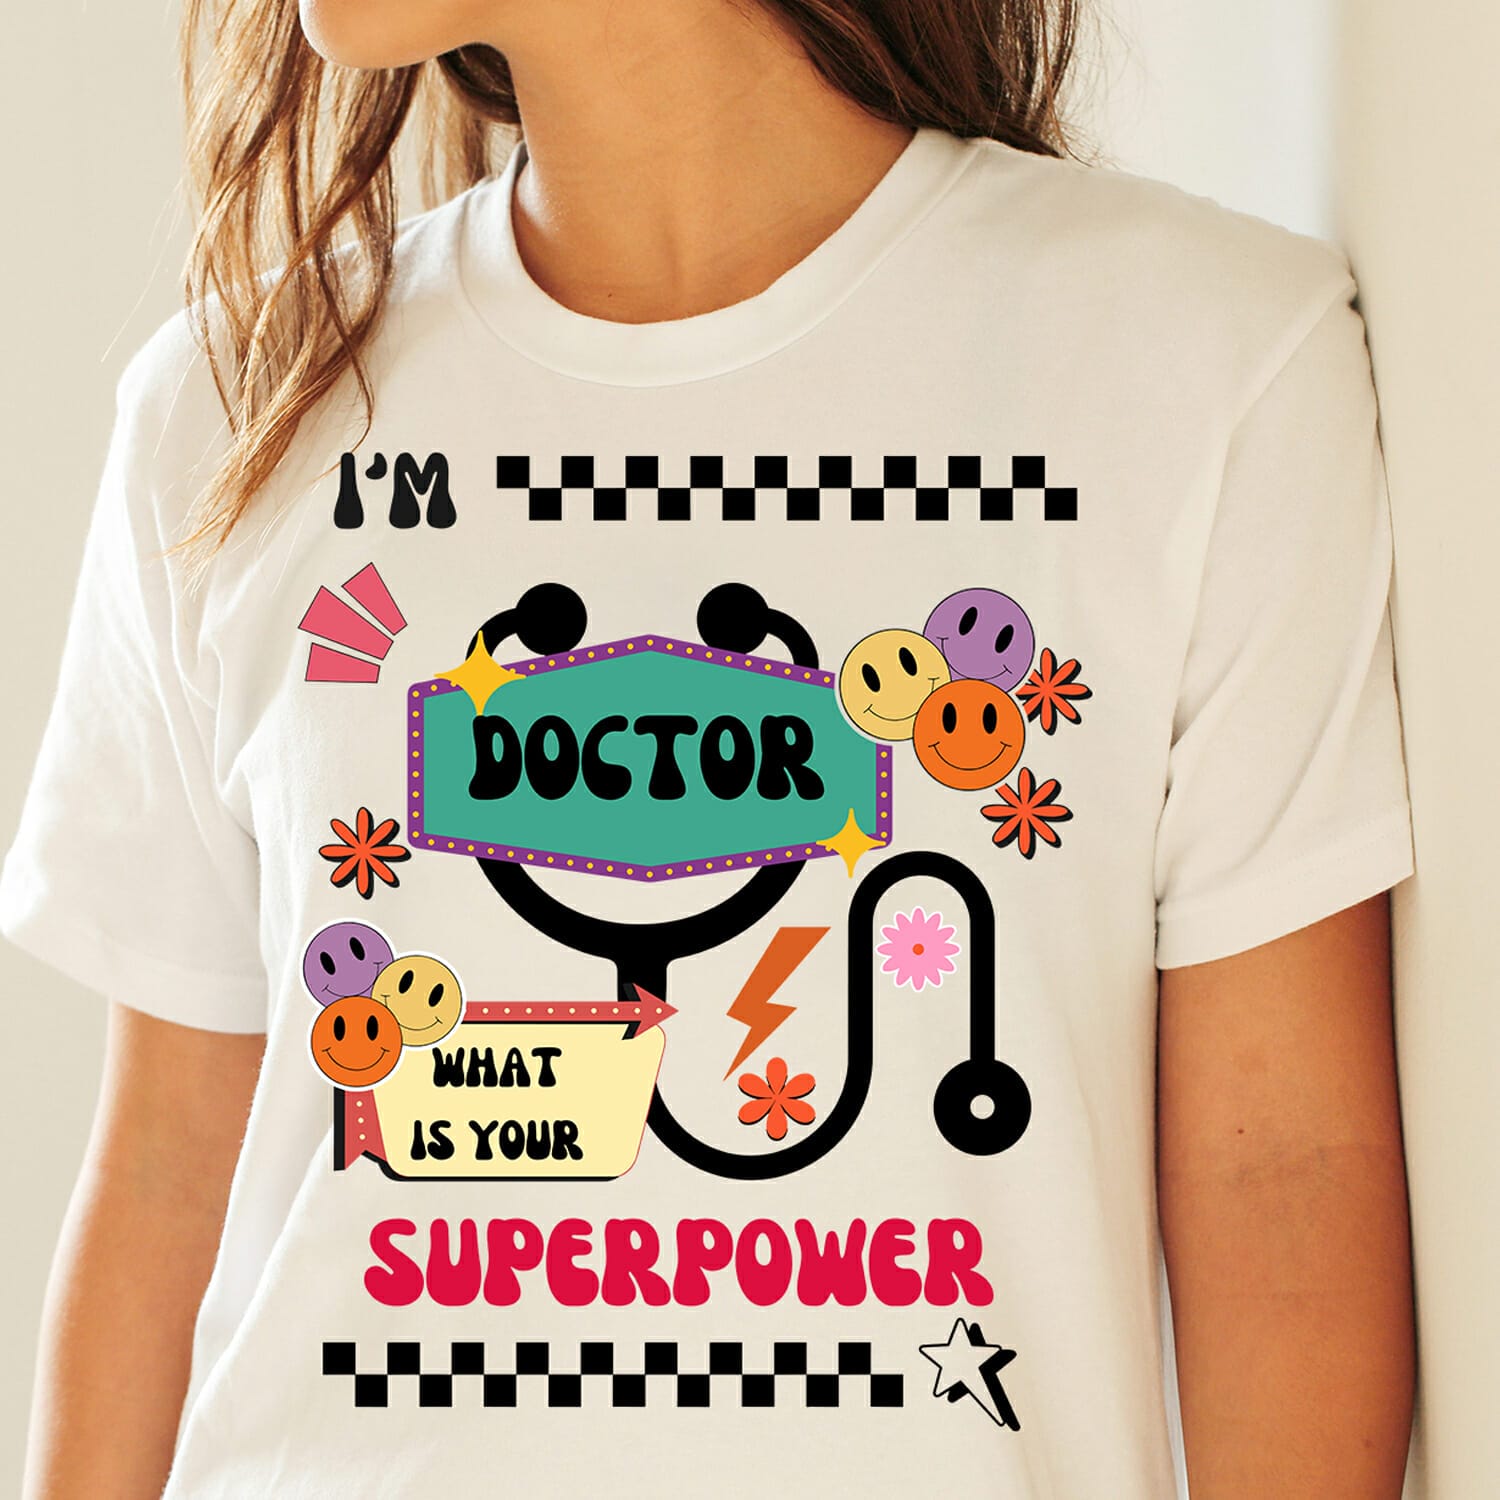 I am a Doctor what is your superpower - Groovy T-shirt Design